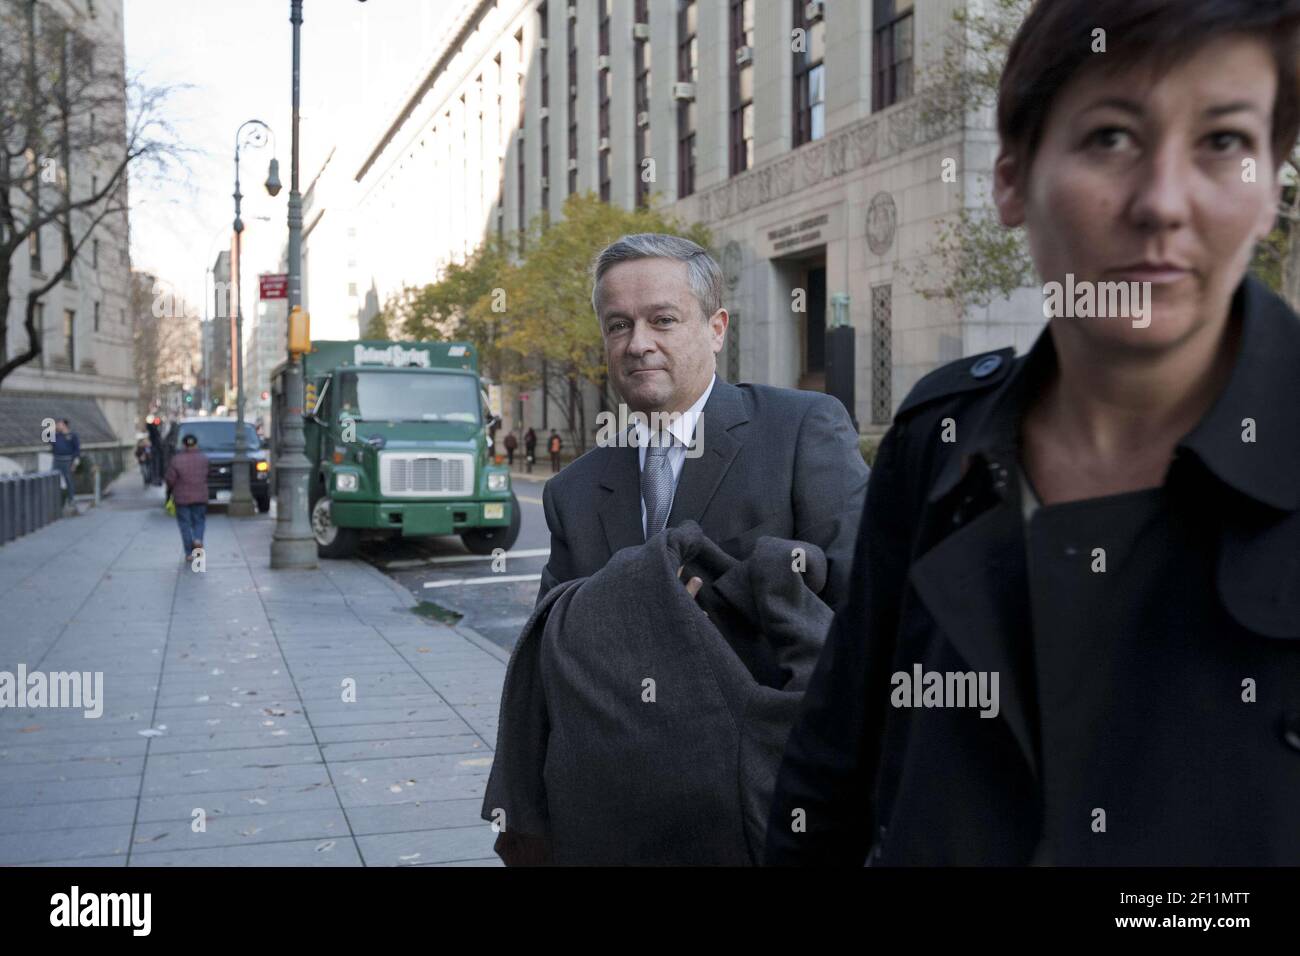 20 November 2009- New York, NY- Former Vivendi CEO Jean-Marie Messier arrives at the United States Courthouse in lower Manhattan to testify in a civil trial regarding the defrauding of shareholders by the French conglomerate. Photo Credit: Erik Sumption/Sipa Press/Messier.004/0911210451 Stock Photo